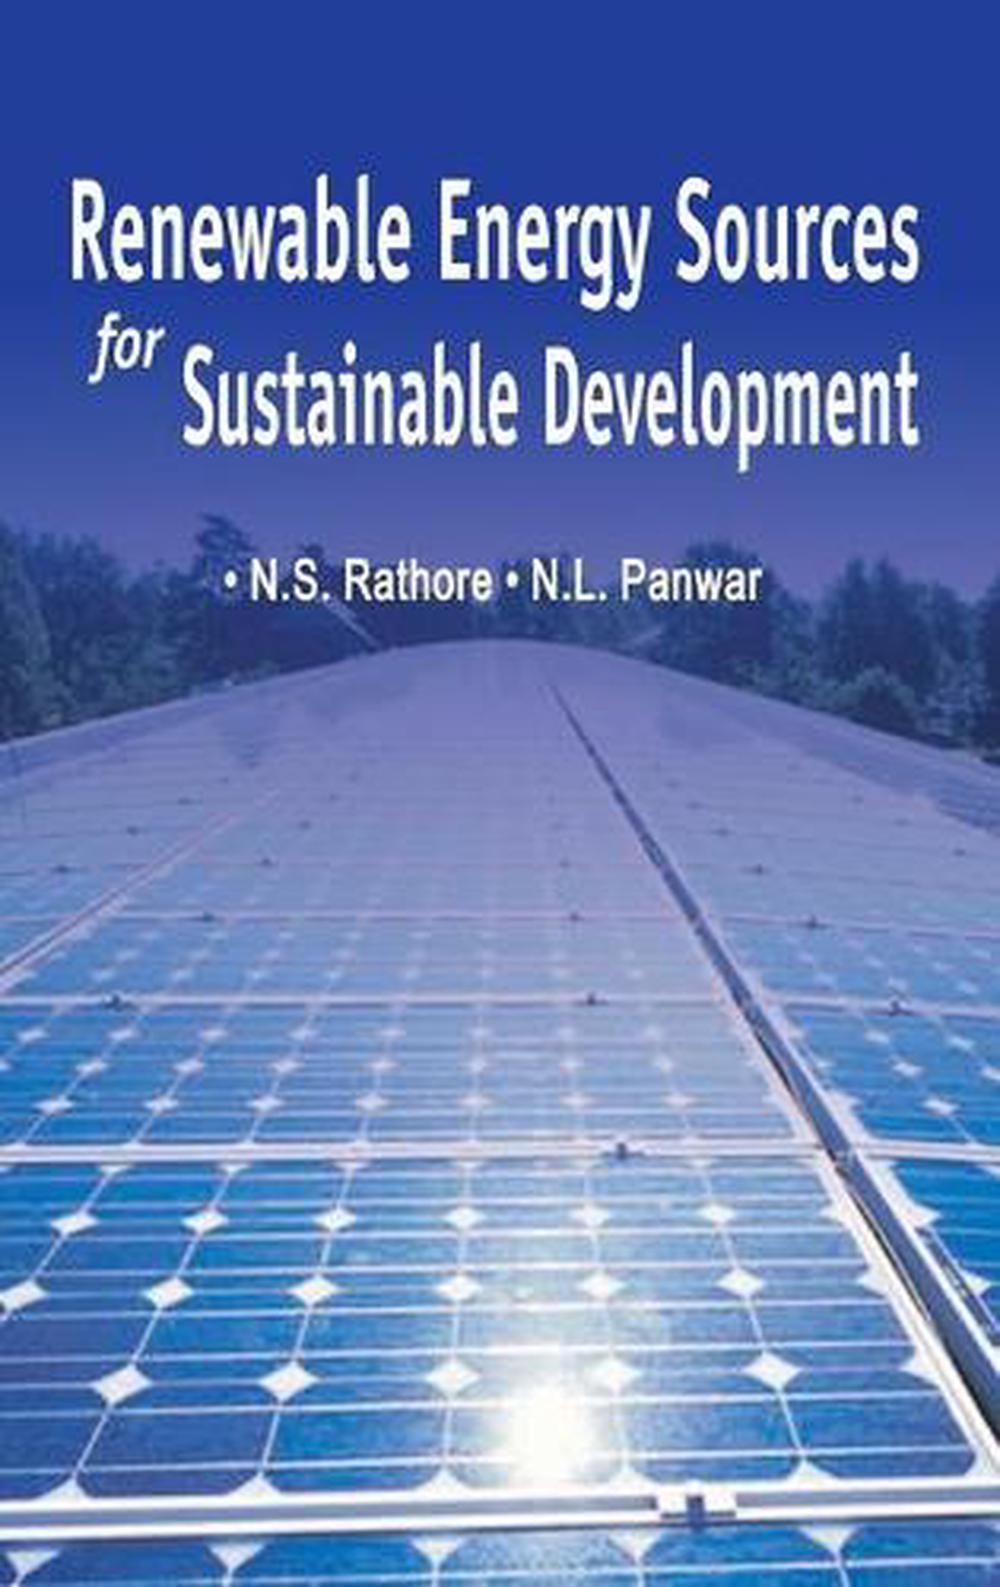 literature review on renewable energy source